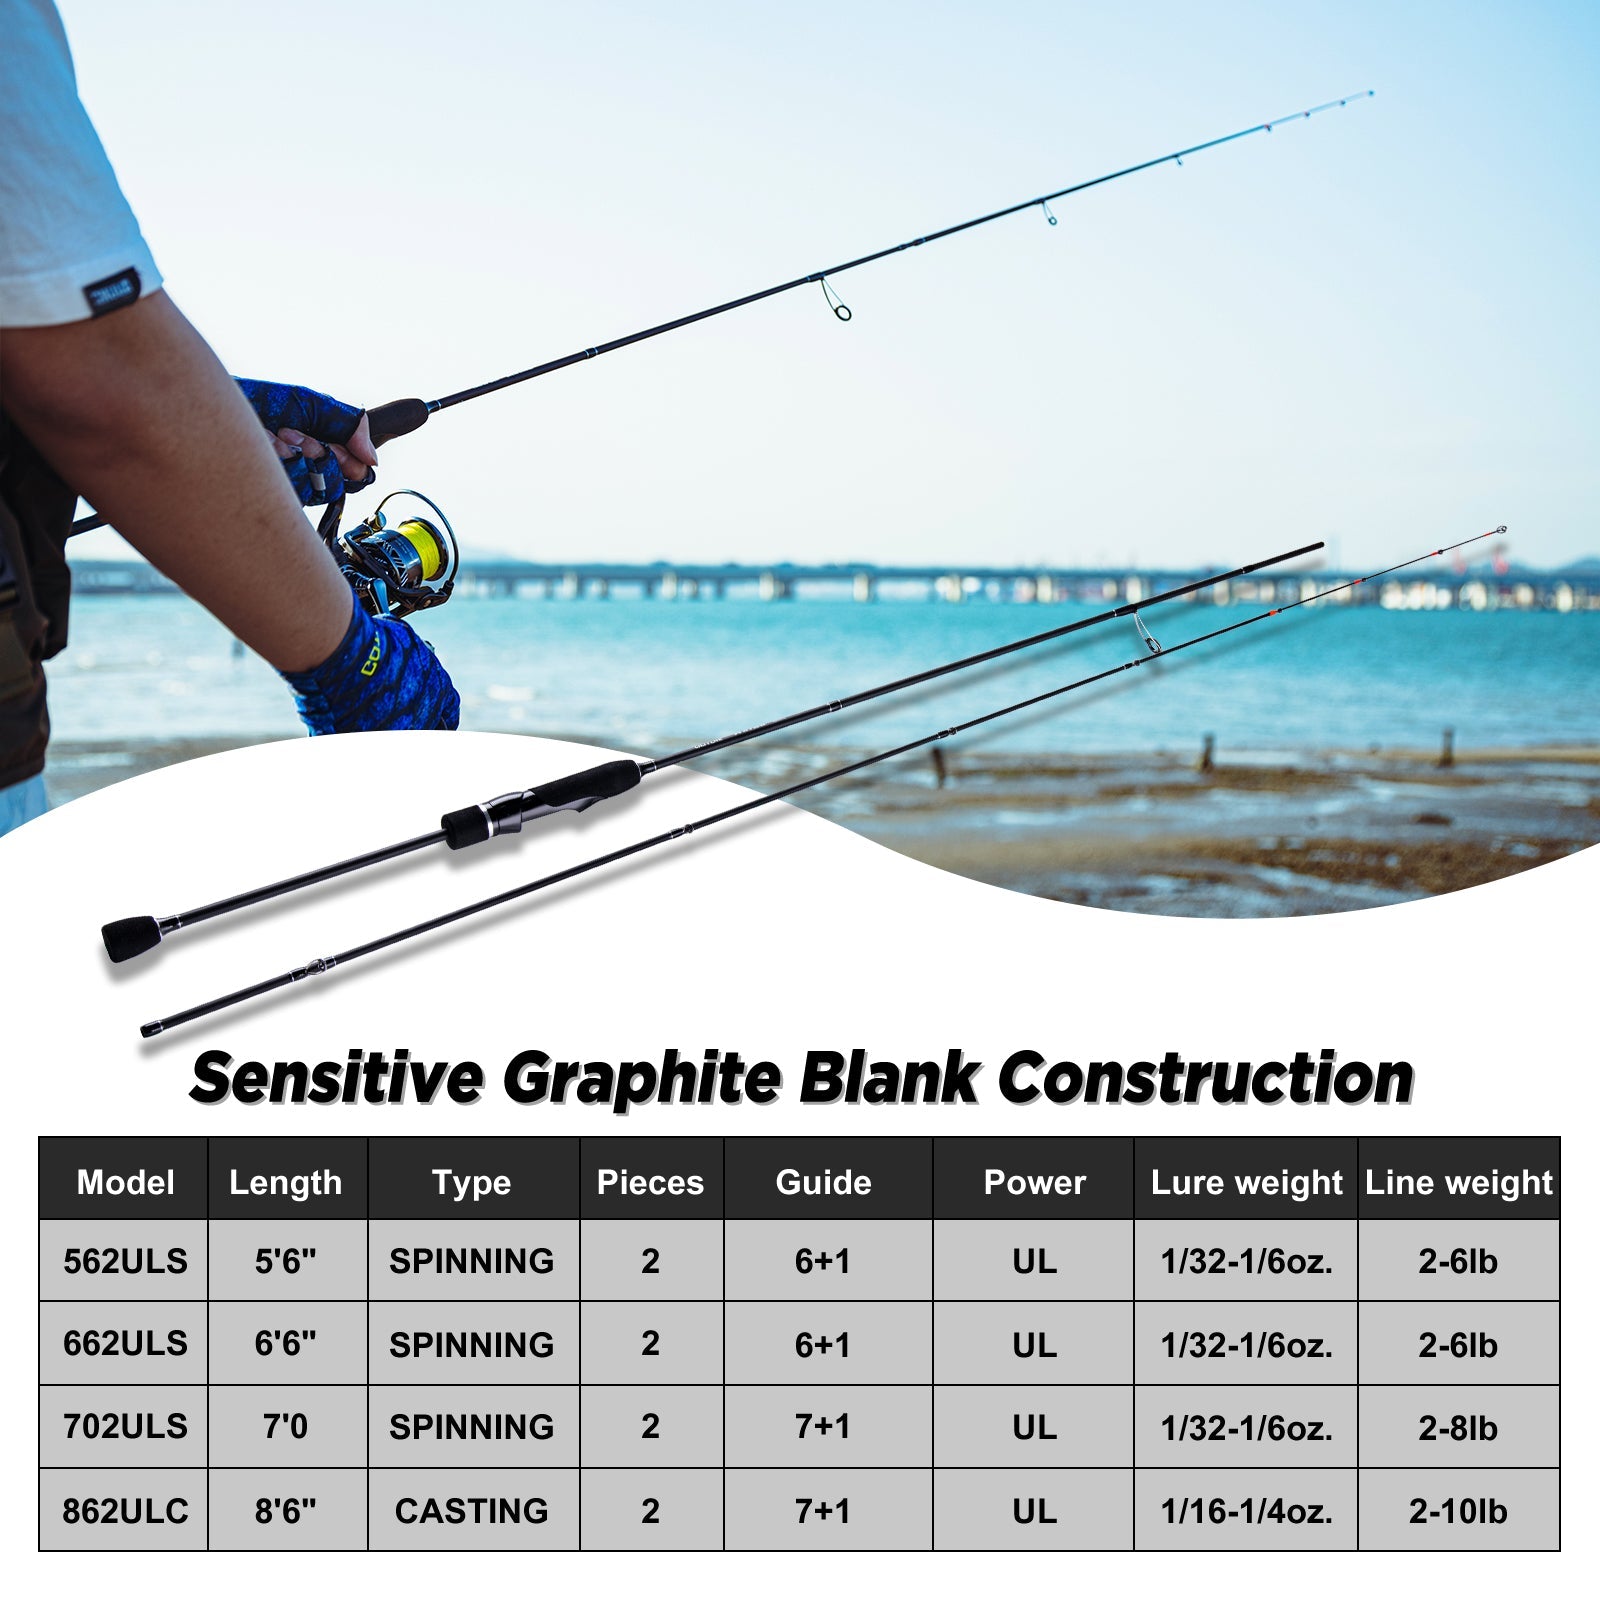 Fishing Rod 1.98m Fishing Rod Spinning Casting Rod Glass Fiber 4 Sections  Fishing Pole for Bass Fishing 2 Color Travel Fishing Pole